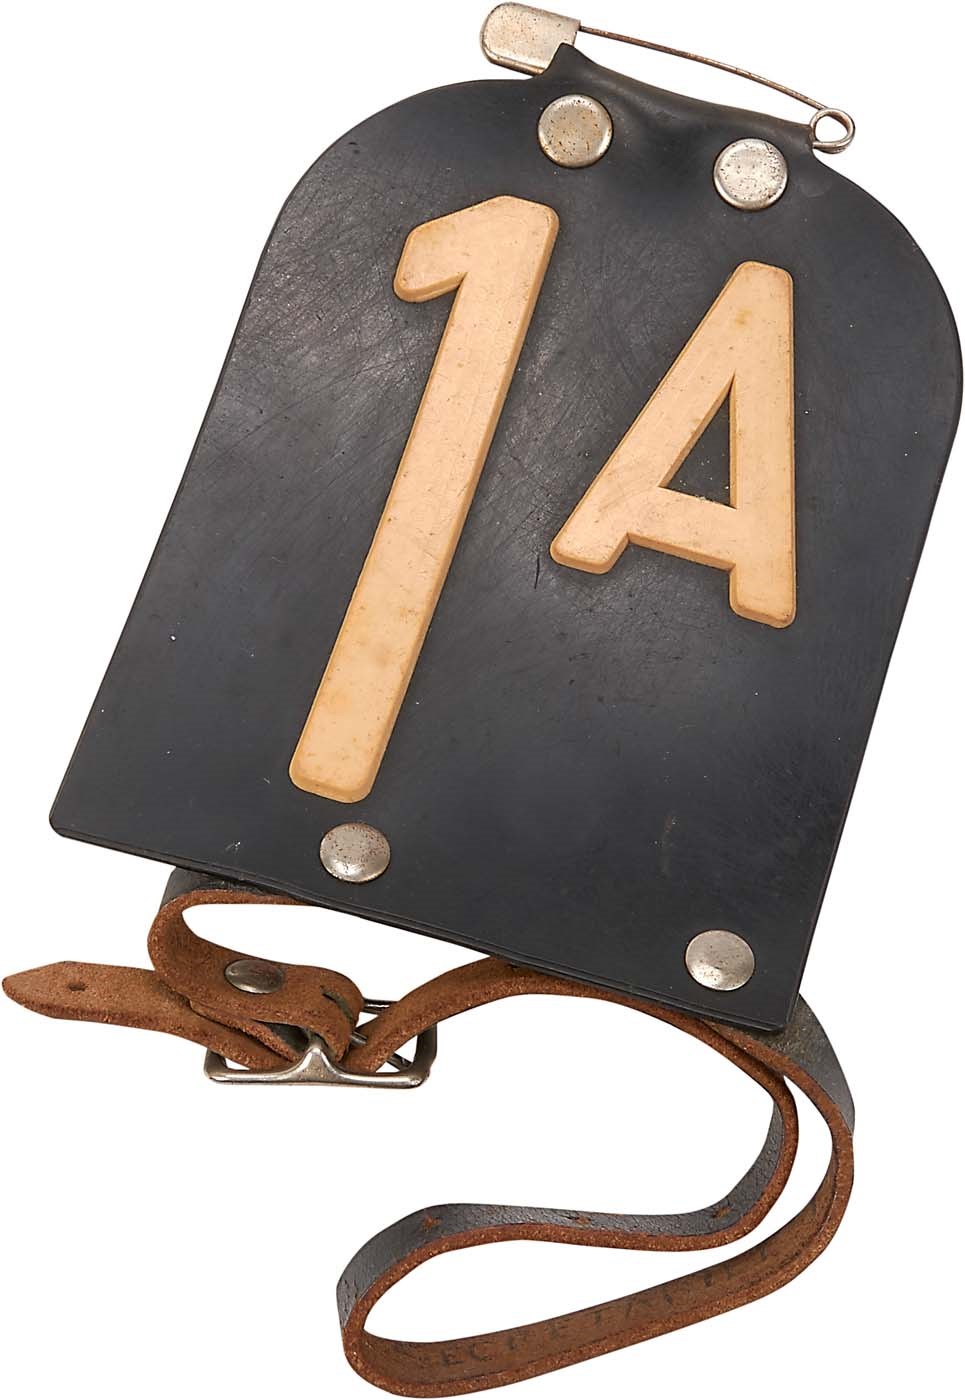 - ​1973 Secretariat Kentucky Derby Armband Worn by Ron Turcotte (Photo-Matched)​